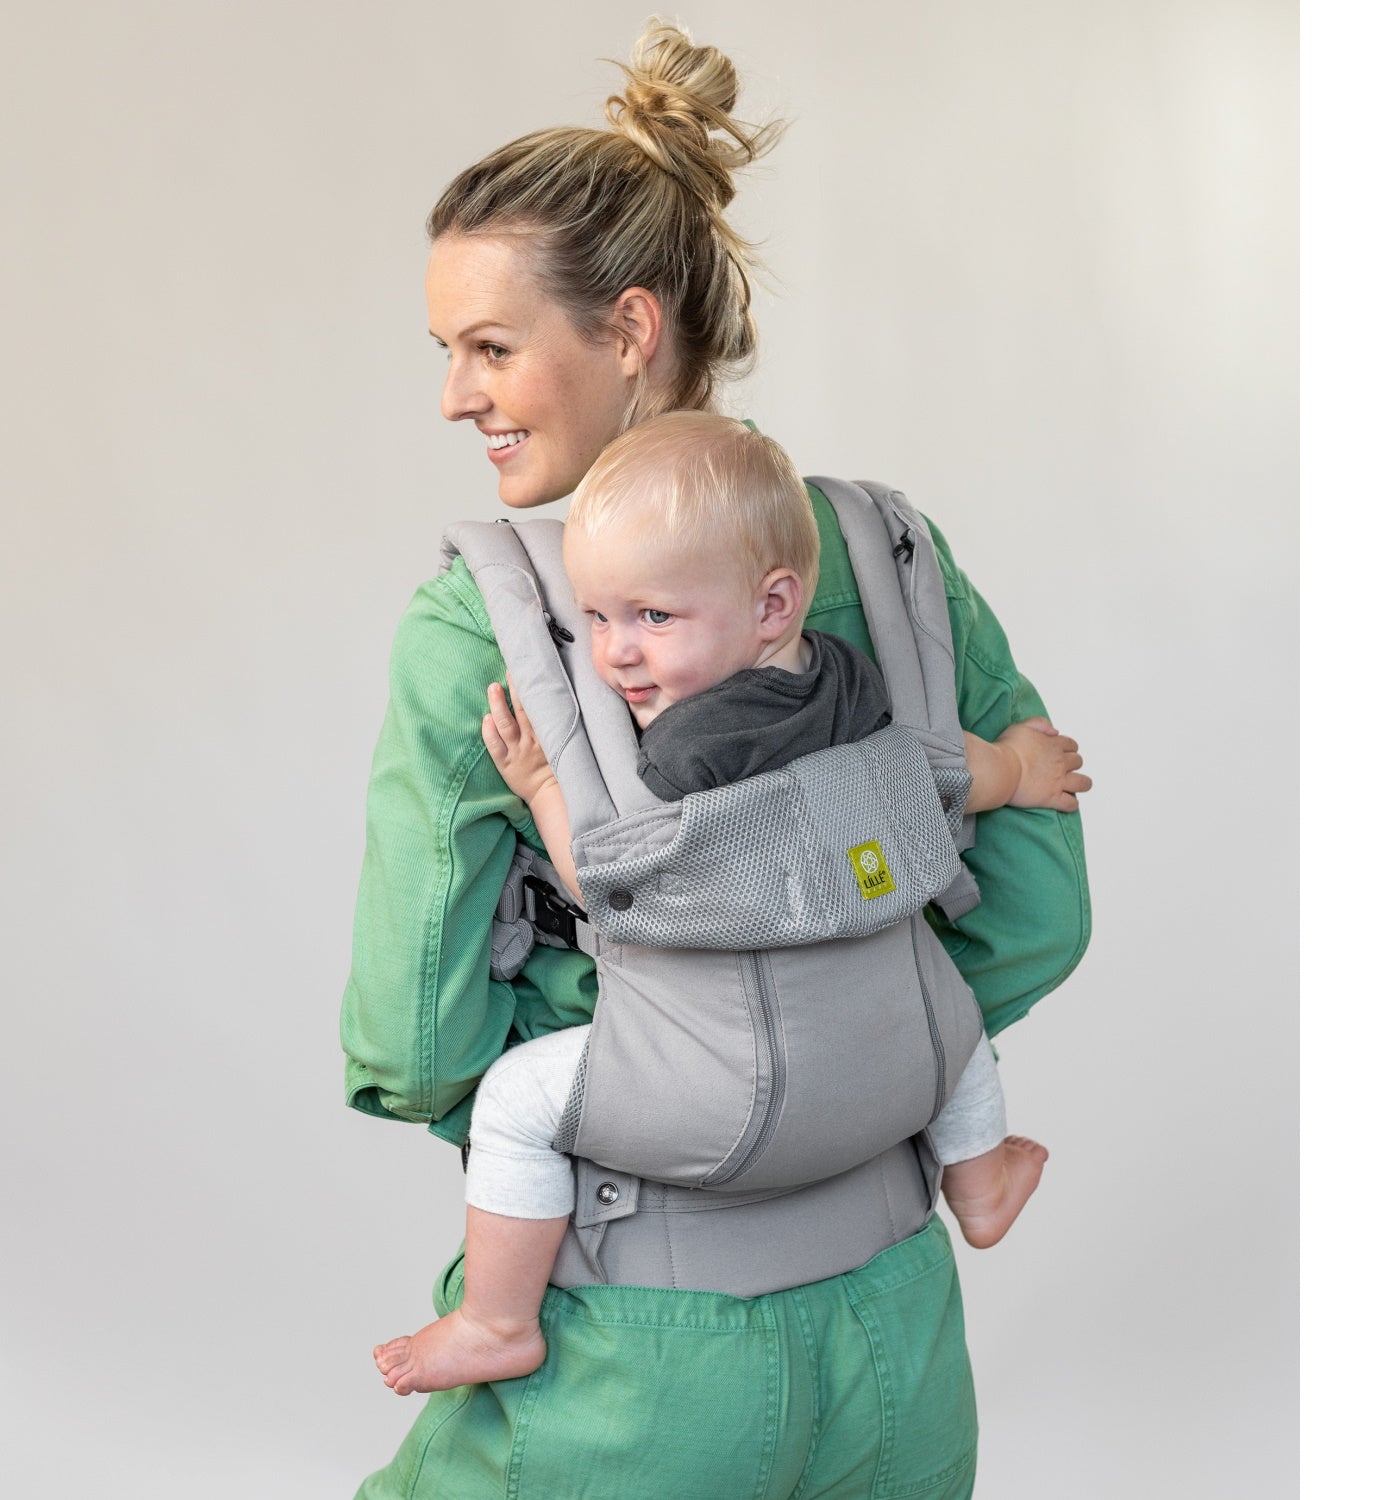 Mum and baby in the LILLEbaby carrier, back carry position. The Babywearing Series. Belly Beyond.